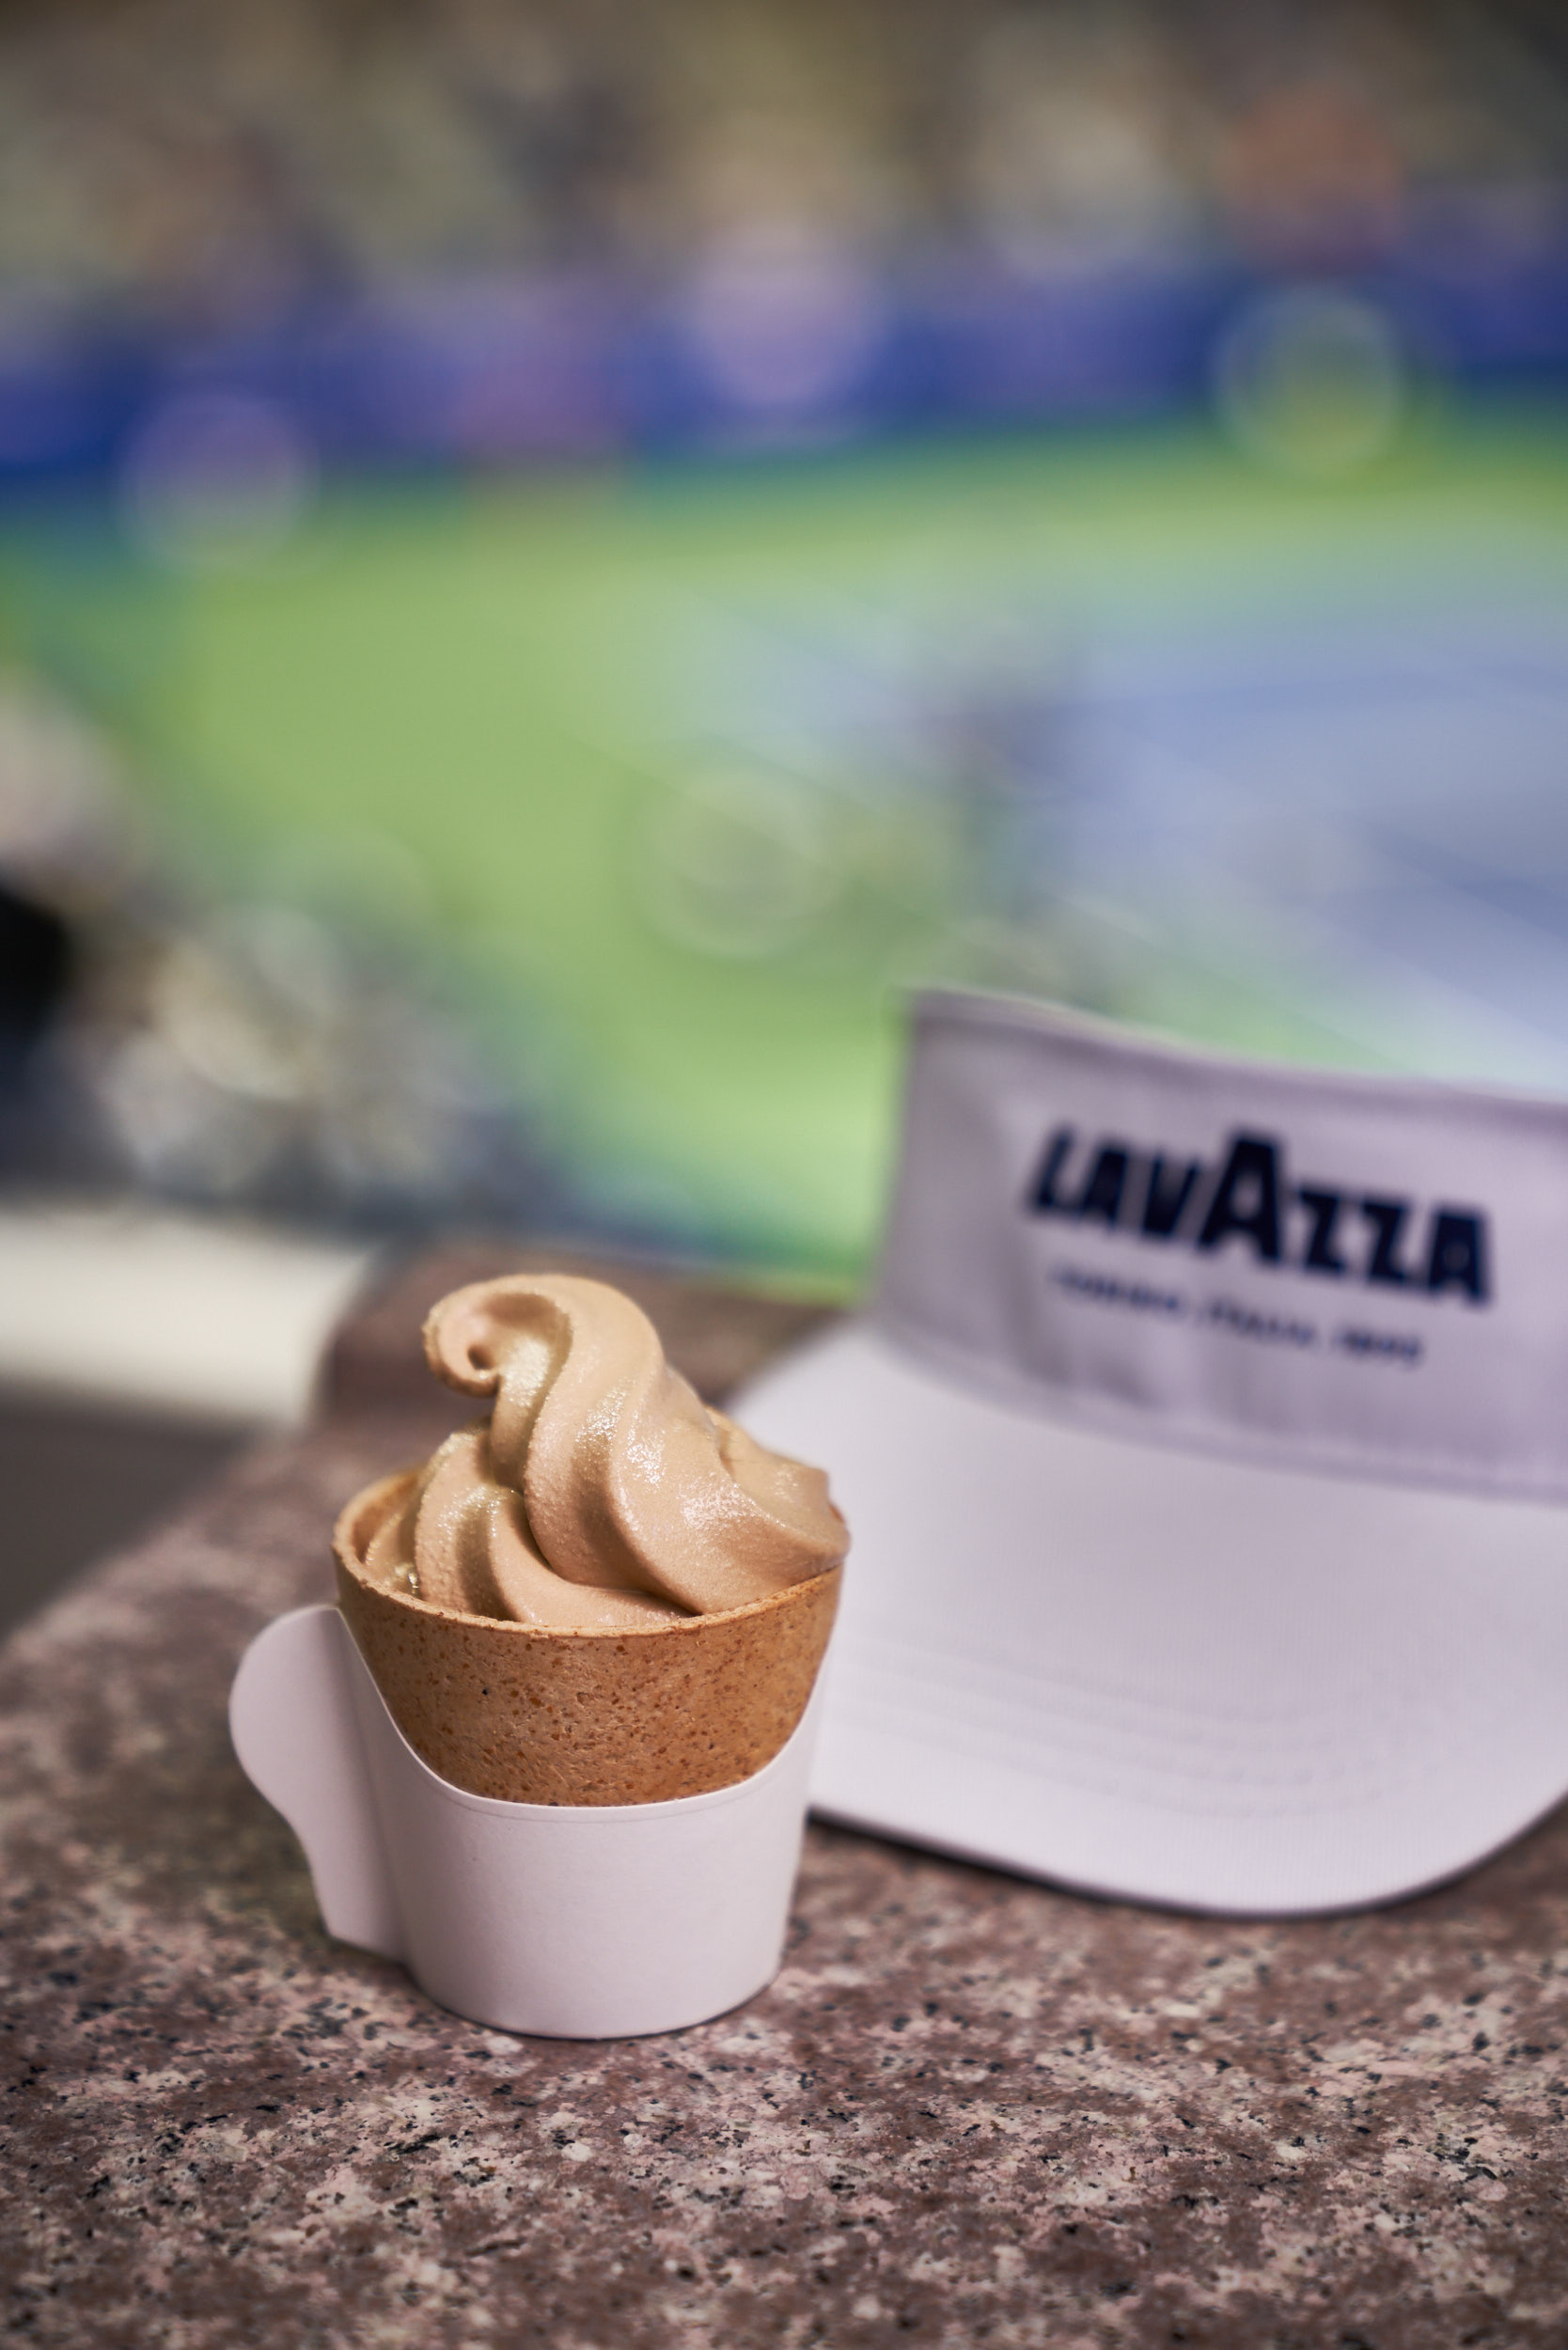 Lavazza - Cookie Cup